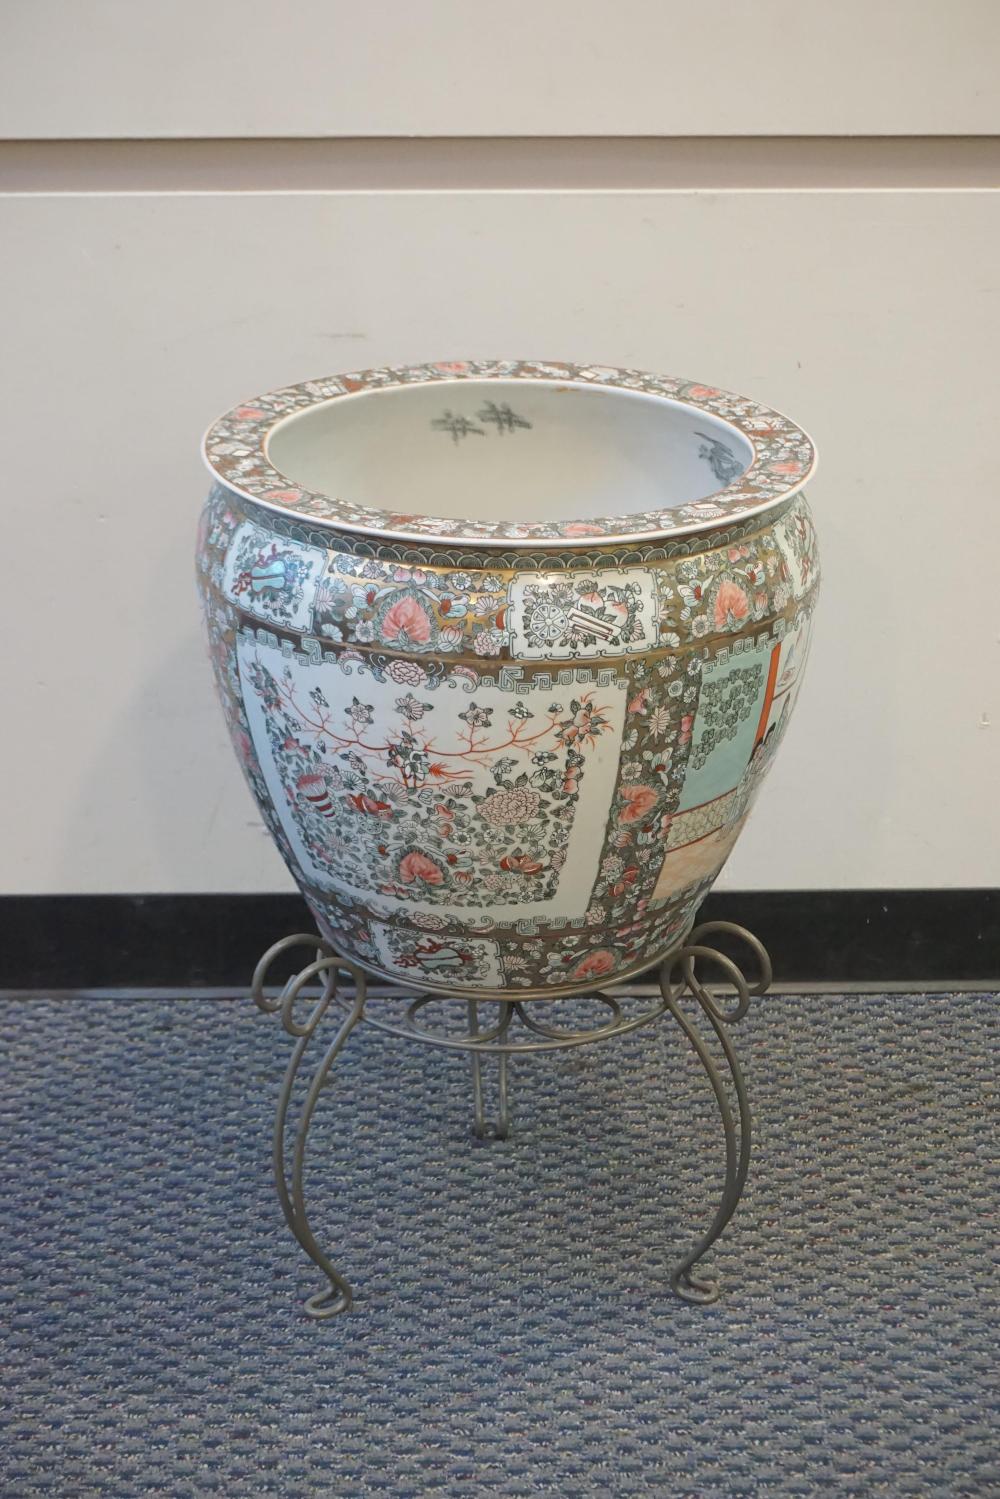 CHINESE POLYCHROME DECORATED PORCELAIN